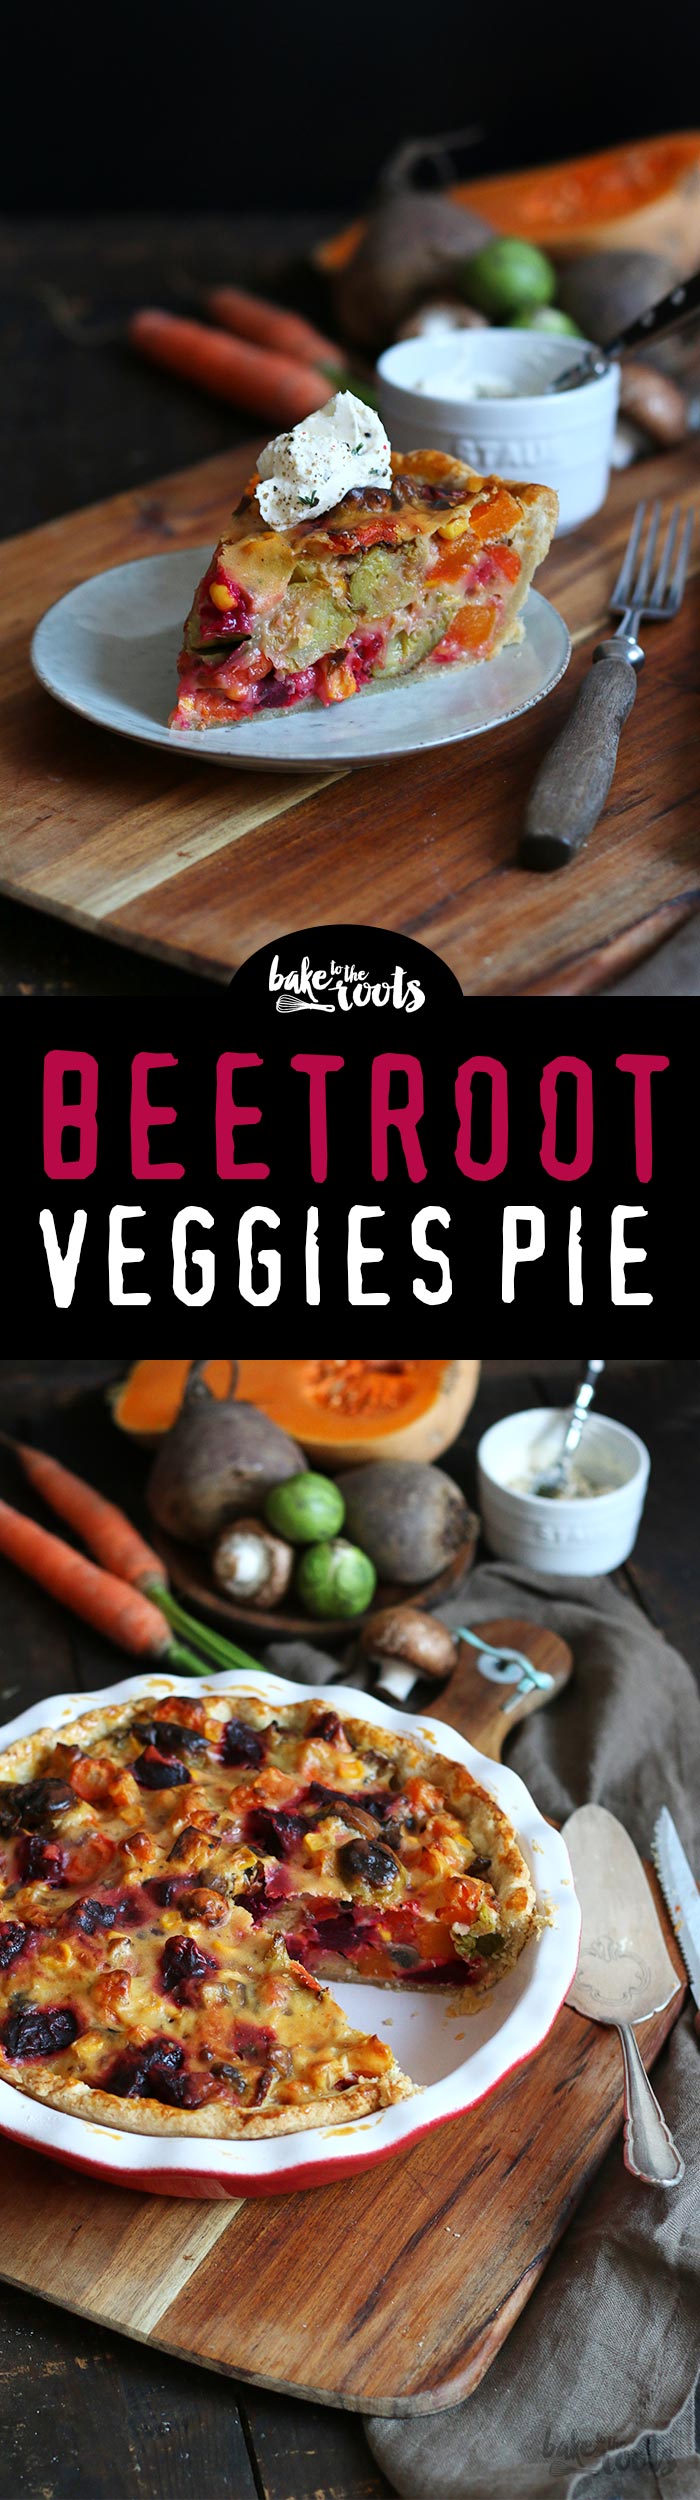 Delicious winter veggie pie with beetroot | Bake to the roots